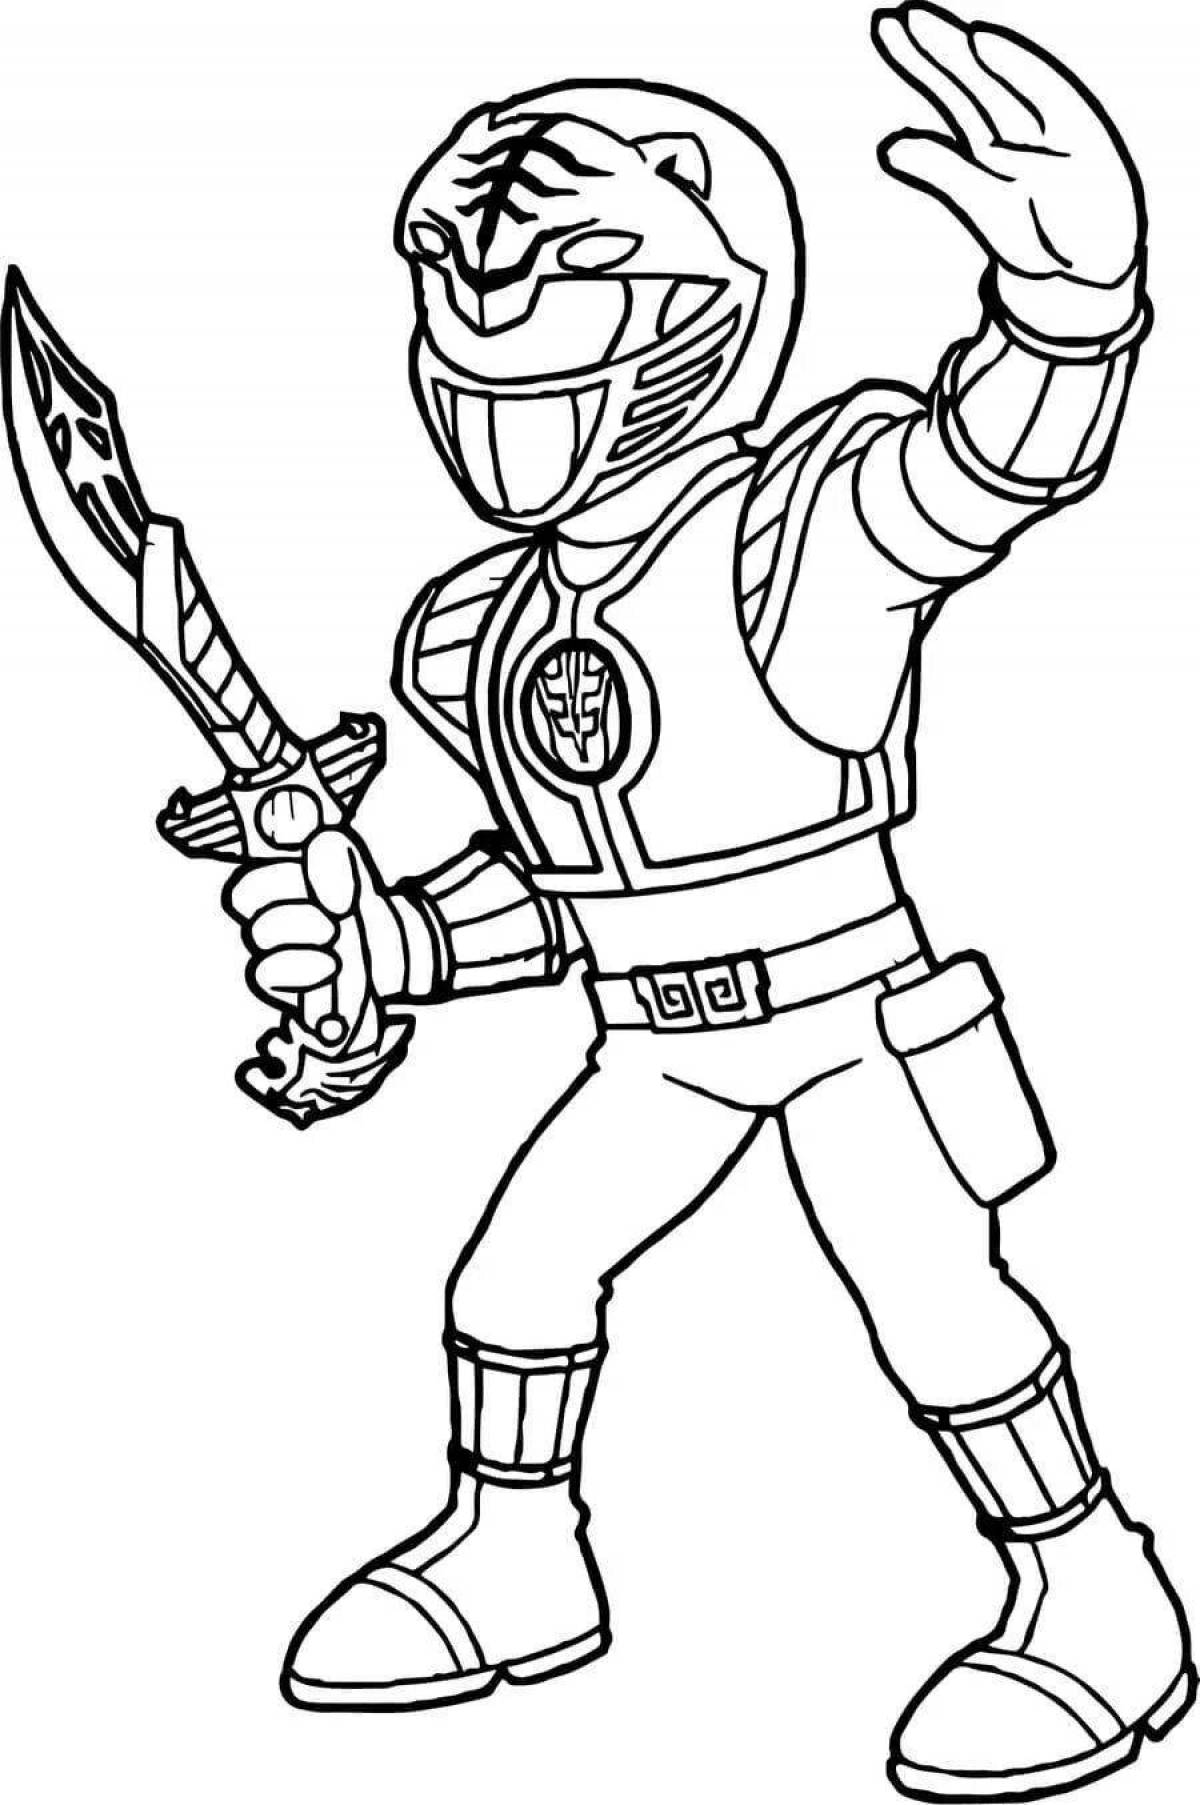 Coloring page funny power rangers